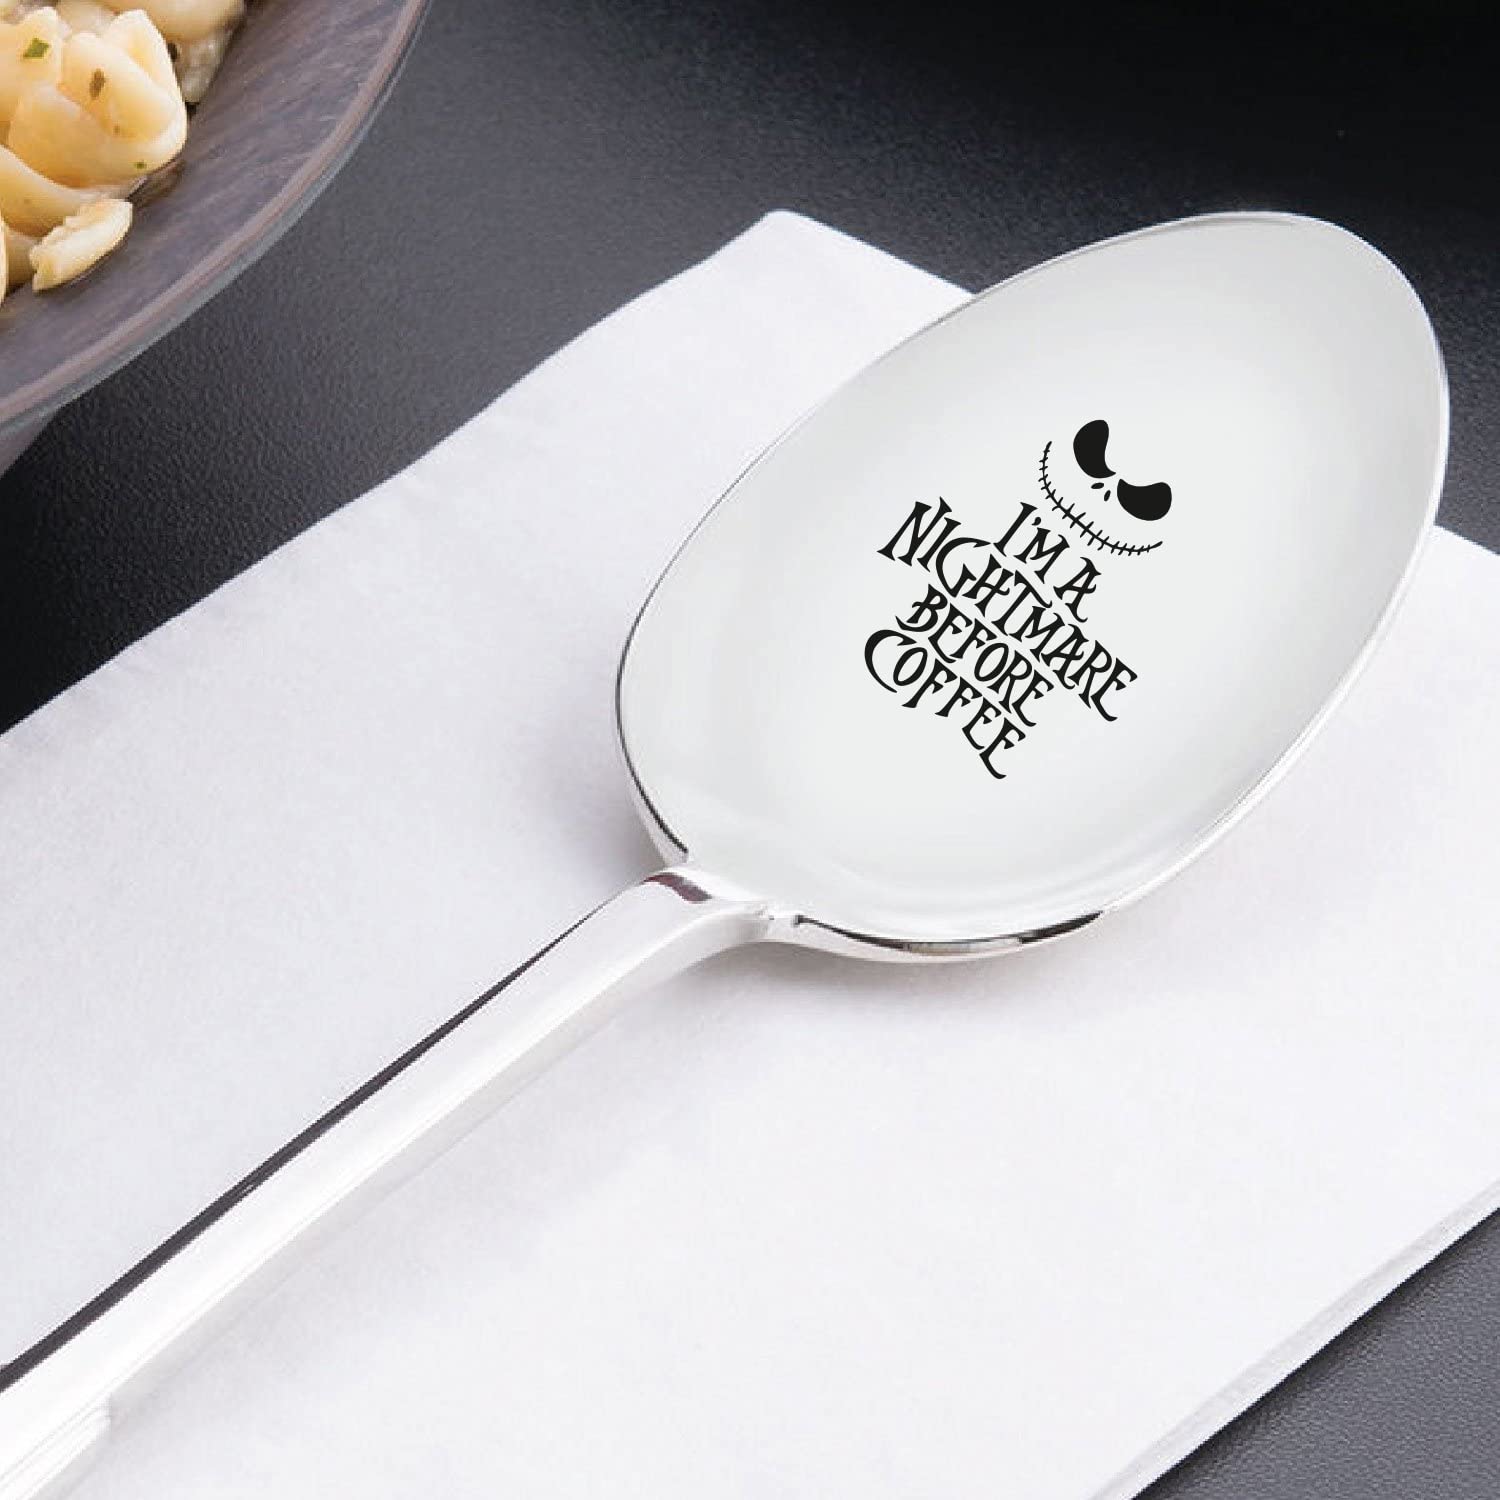 TyM I am a nightmare before coffee Engraved Stainless Steel spoon for coffee tea cereal ice cream - Engraved gift for him/her - 7 inch Sturdy handle and food safe engraving